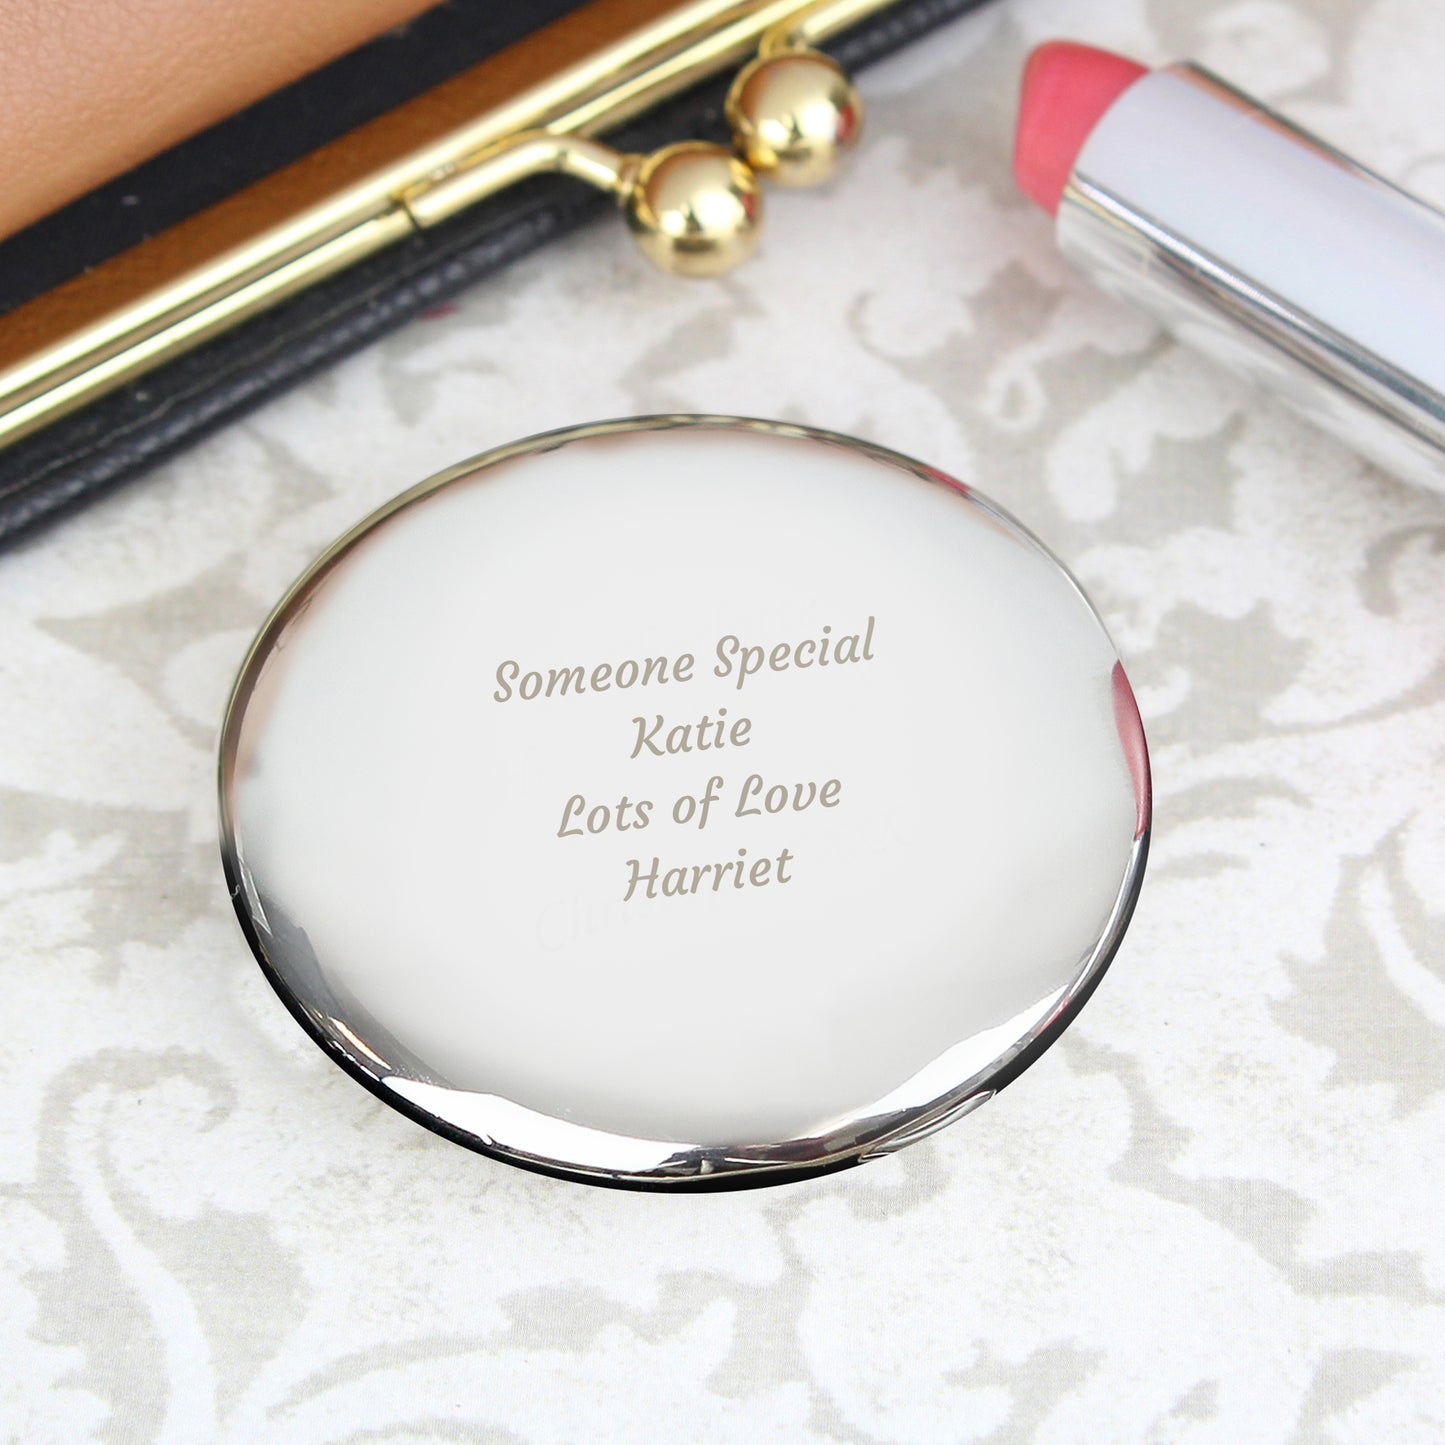 Personalised Any Message Compact Mirror - Personalise It!